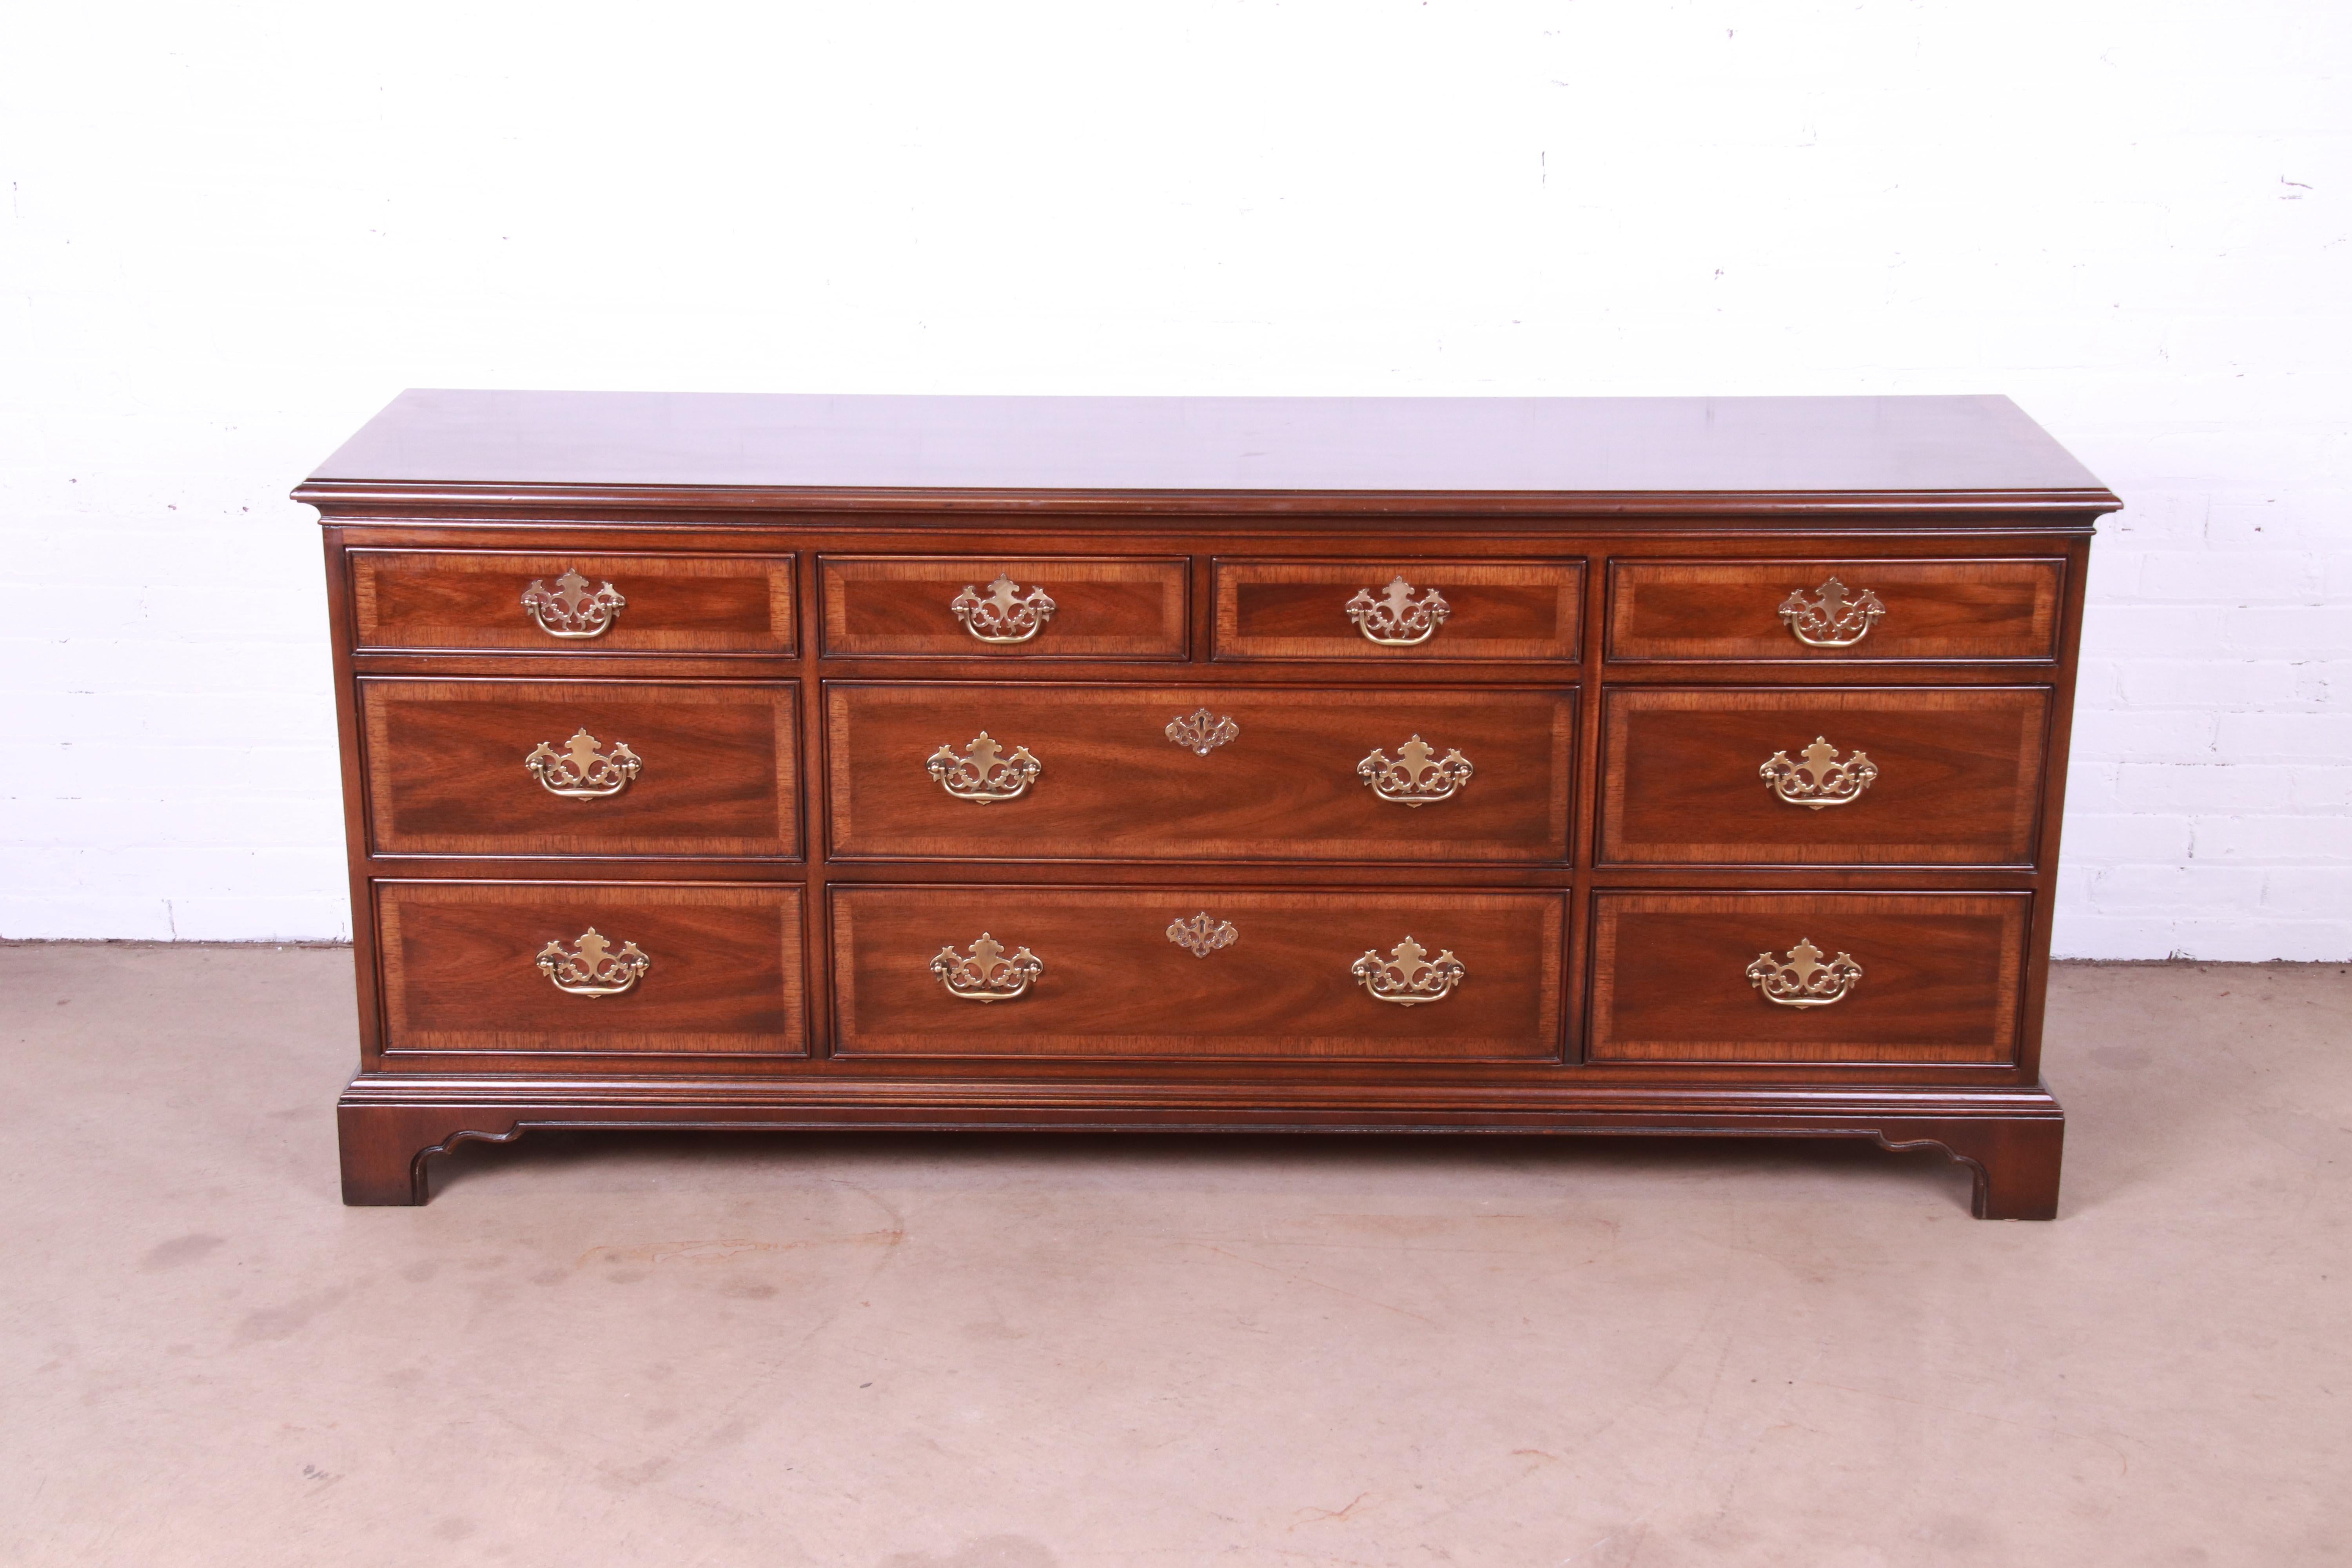 A gorgeous Georgian or Chippendale style ten-drawer dresser or credenza

By Drexel Heritage, 